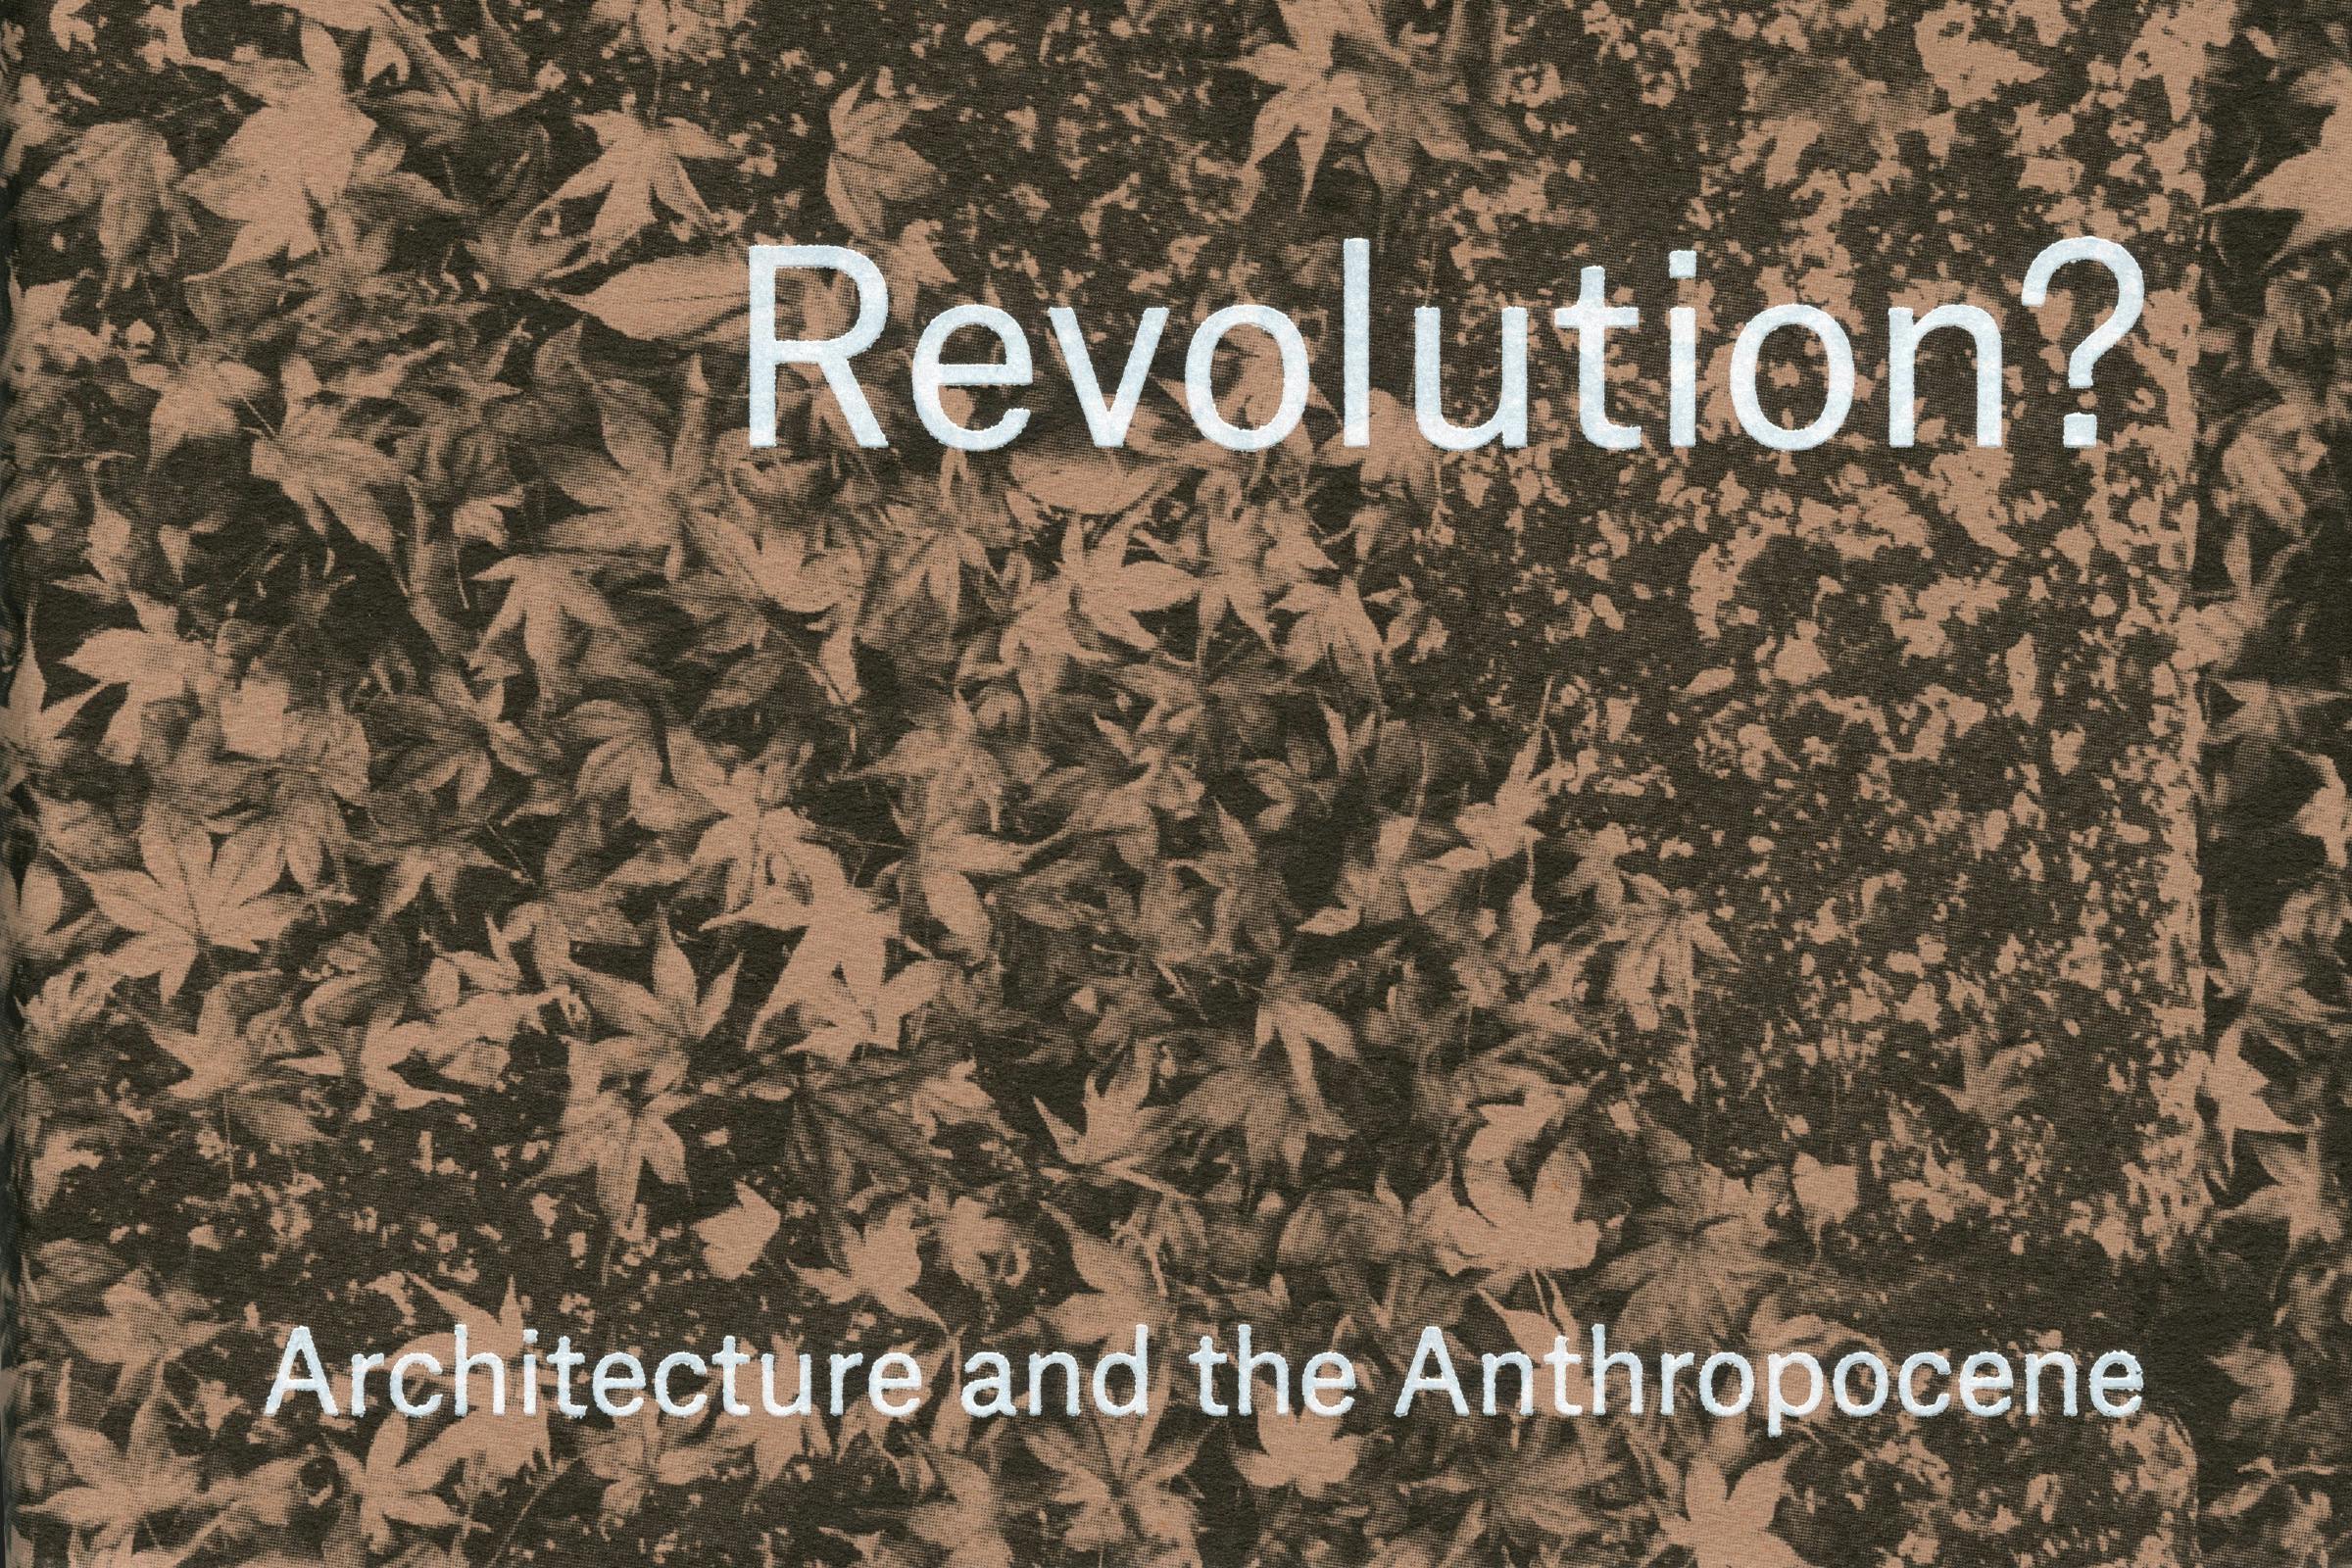 Revolutions?, Revolutions? Architecture in the Anthropocene, Lund Humphries, Publication, Graphic Design by Wolfe Hall